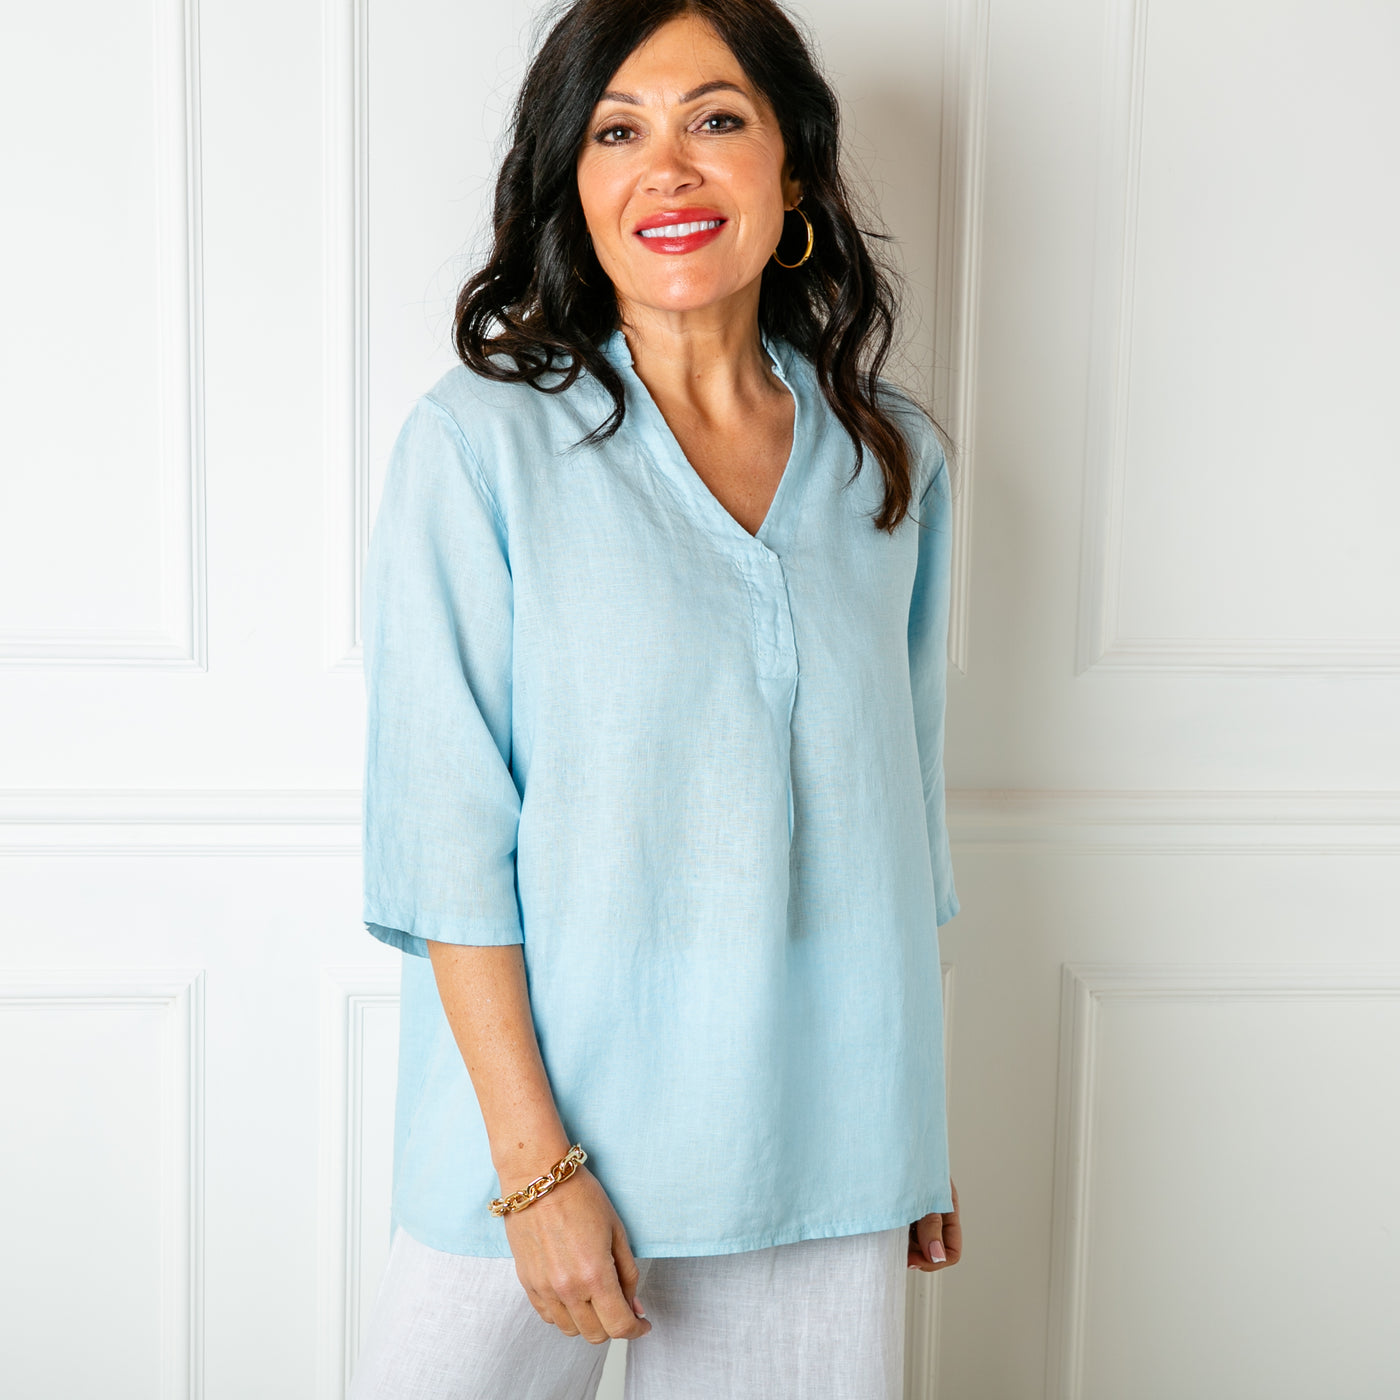 The Linen Tunic Top in baby blue with 3/4 length sleeves and a collarless v neckline